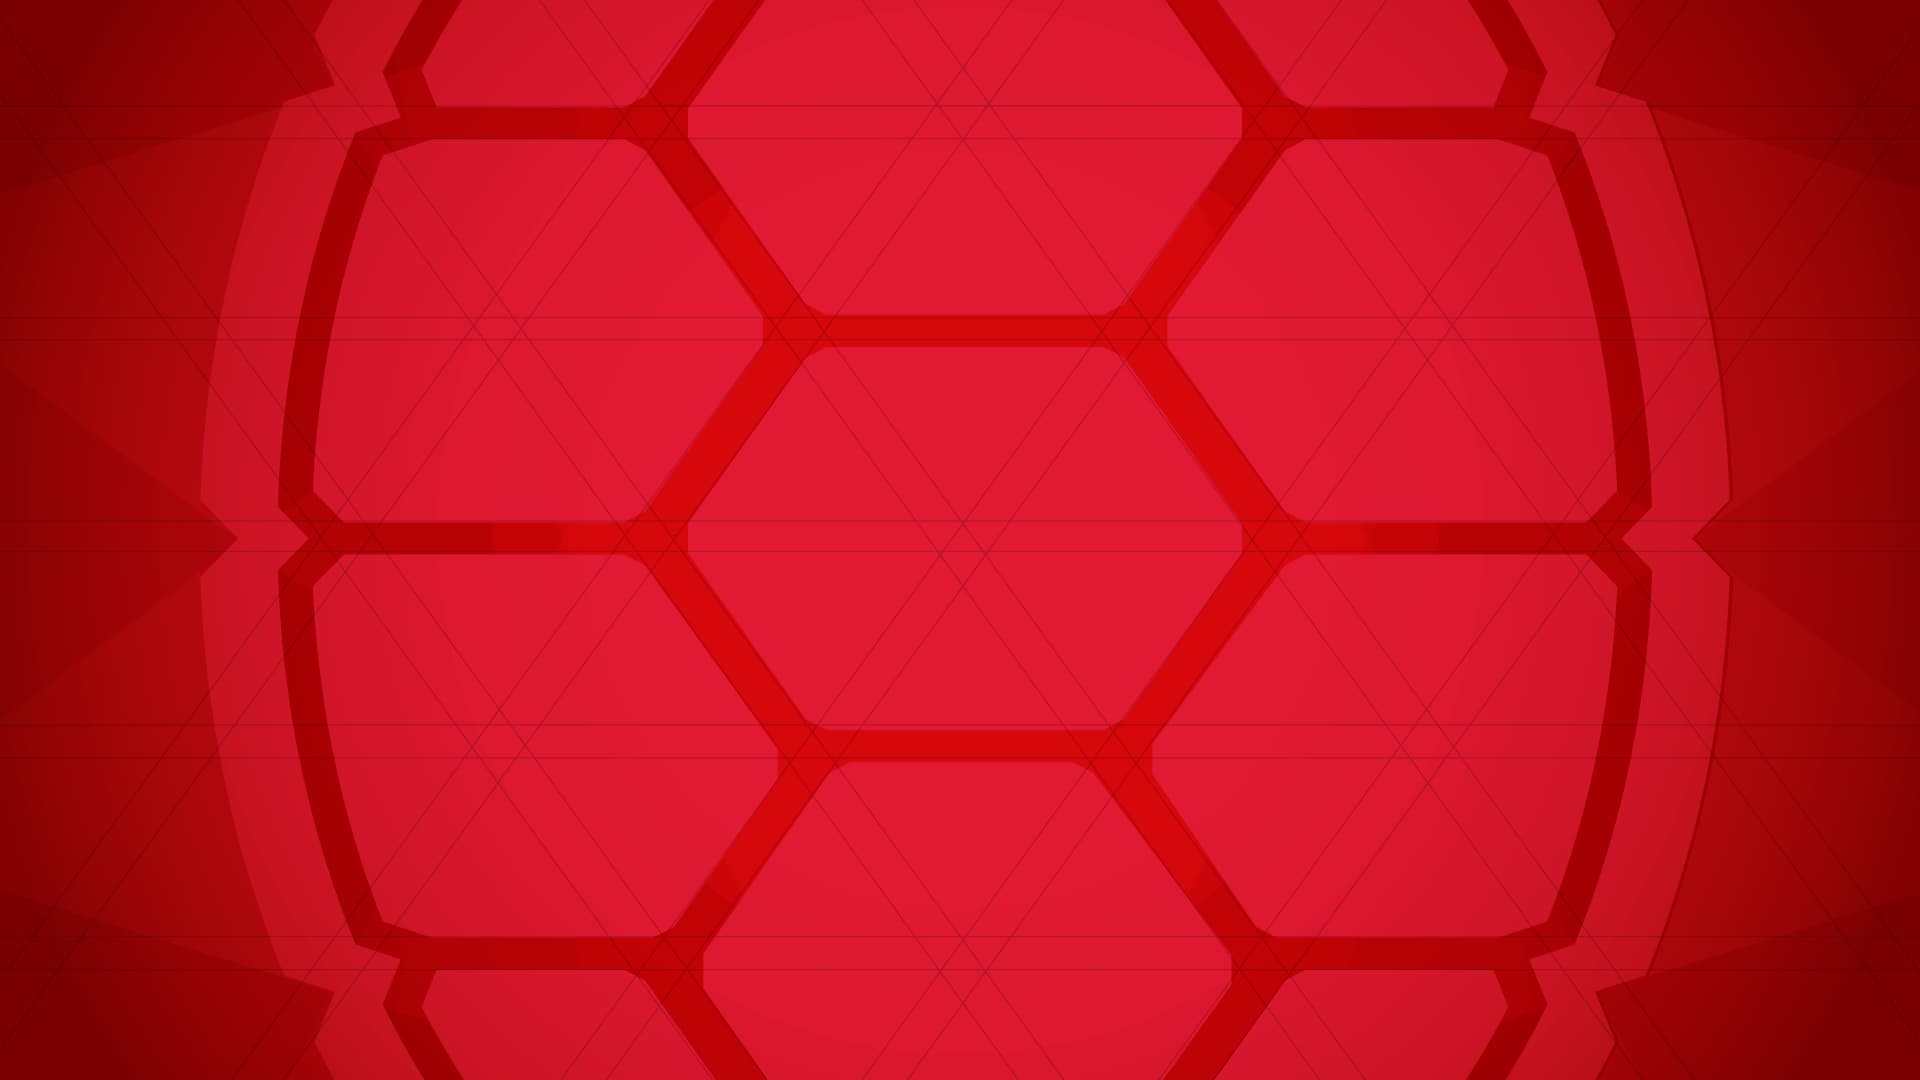 Turtle shell on red background.